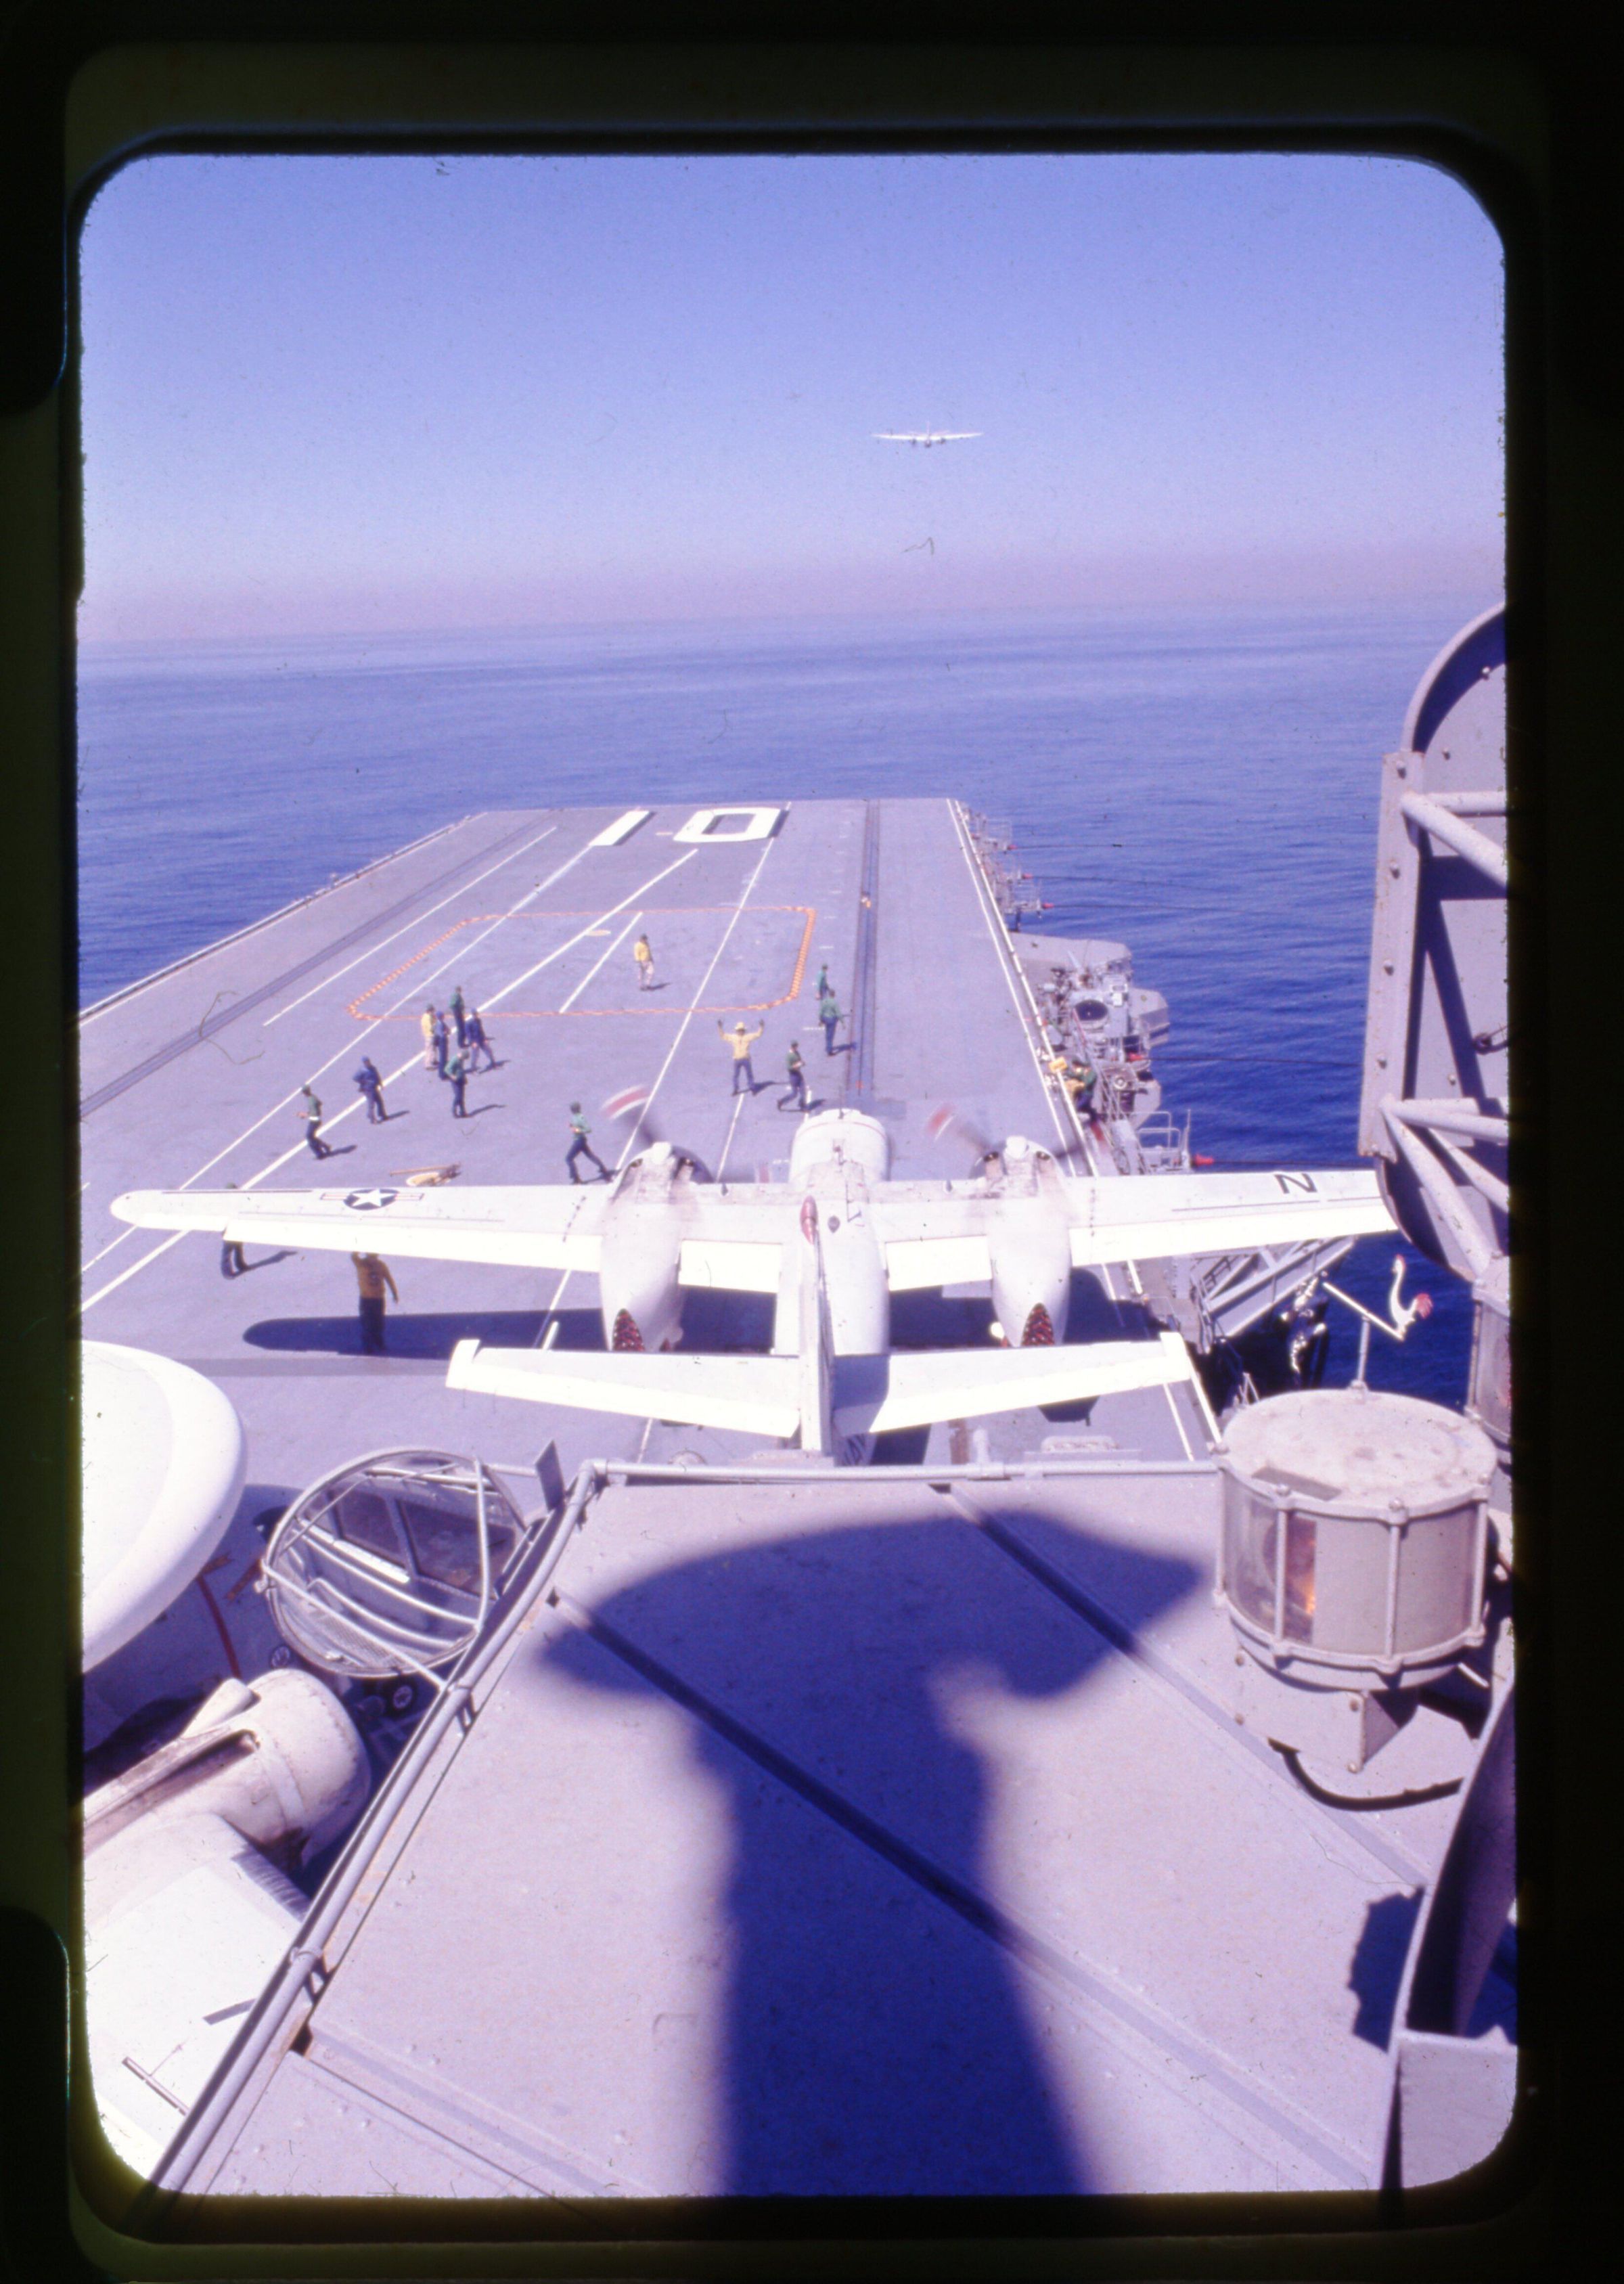 Primary Image of S-2 Trackers Taking off From The USS Yorktown (CVS-10)